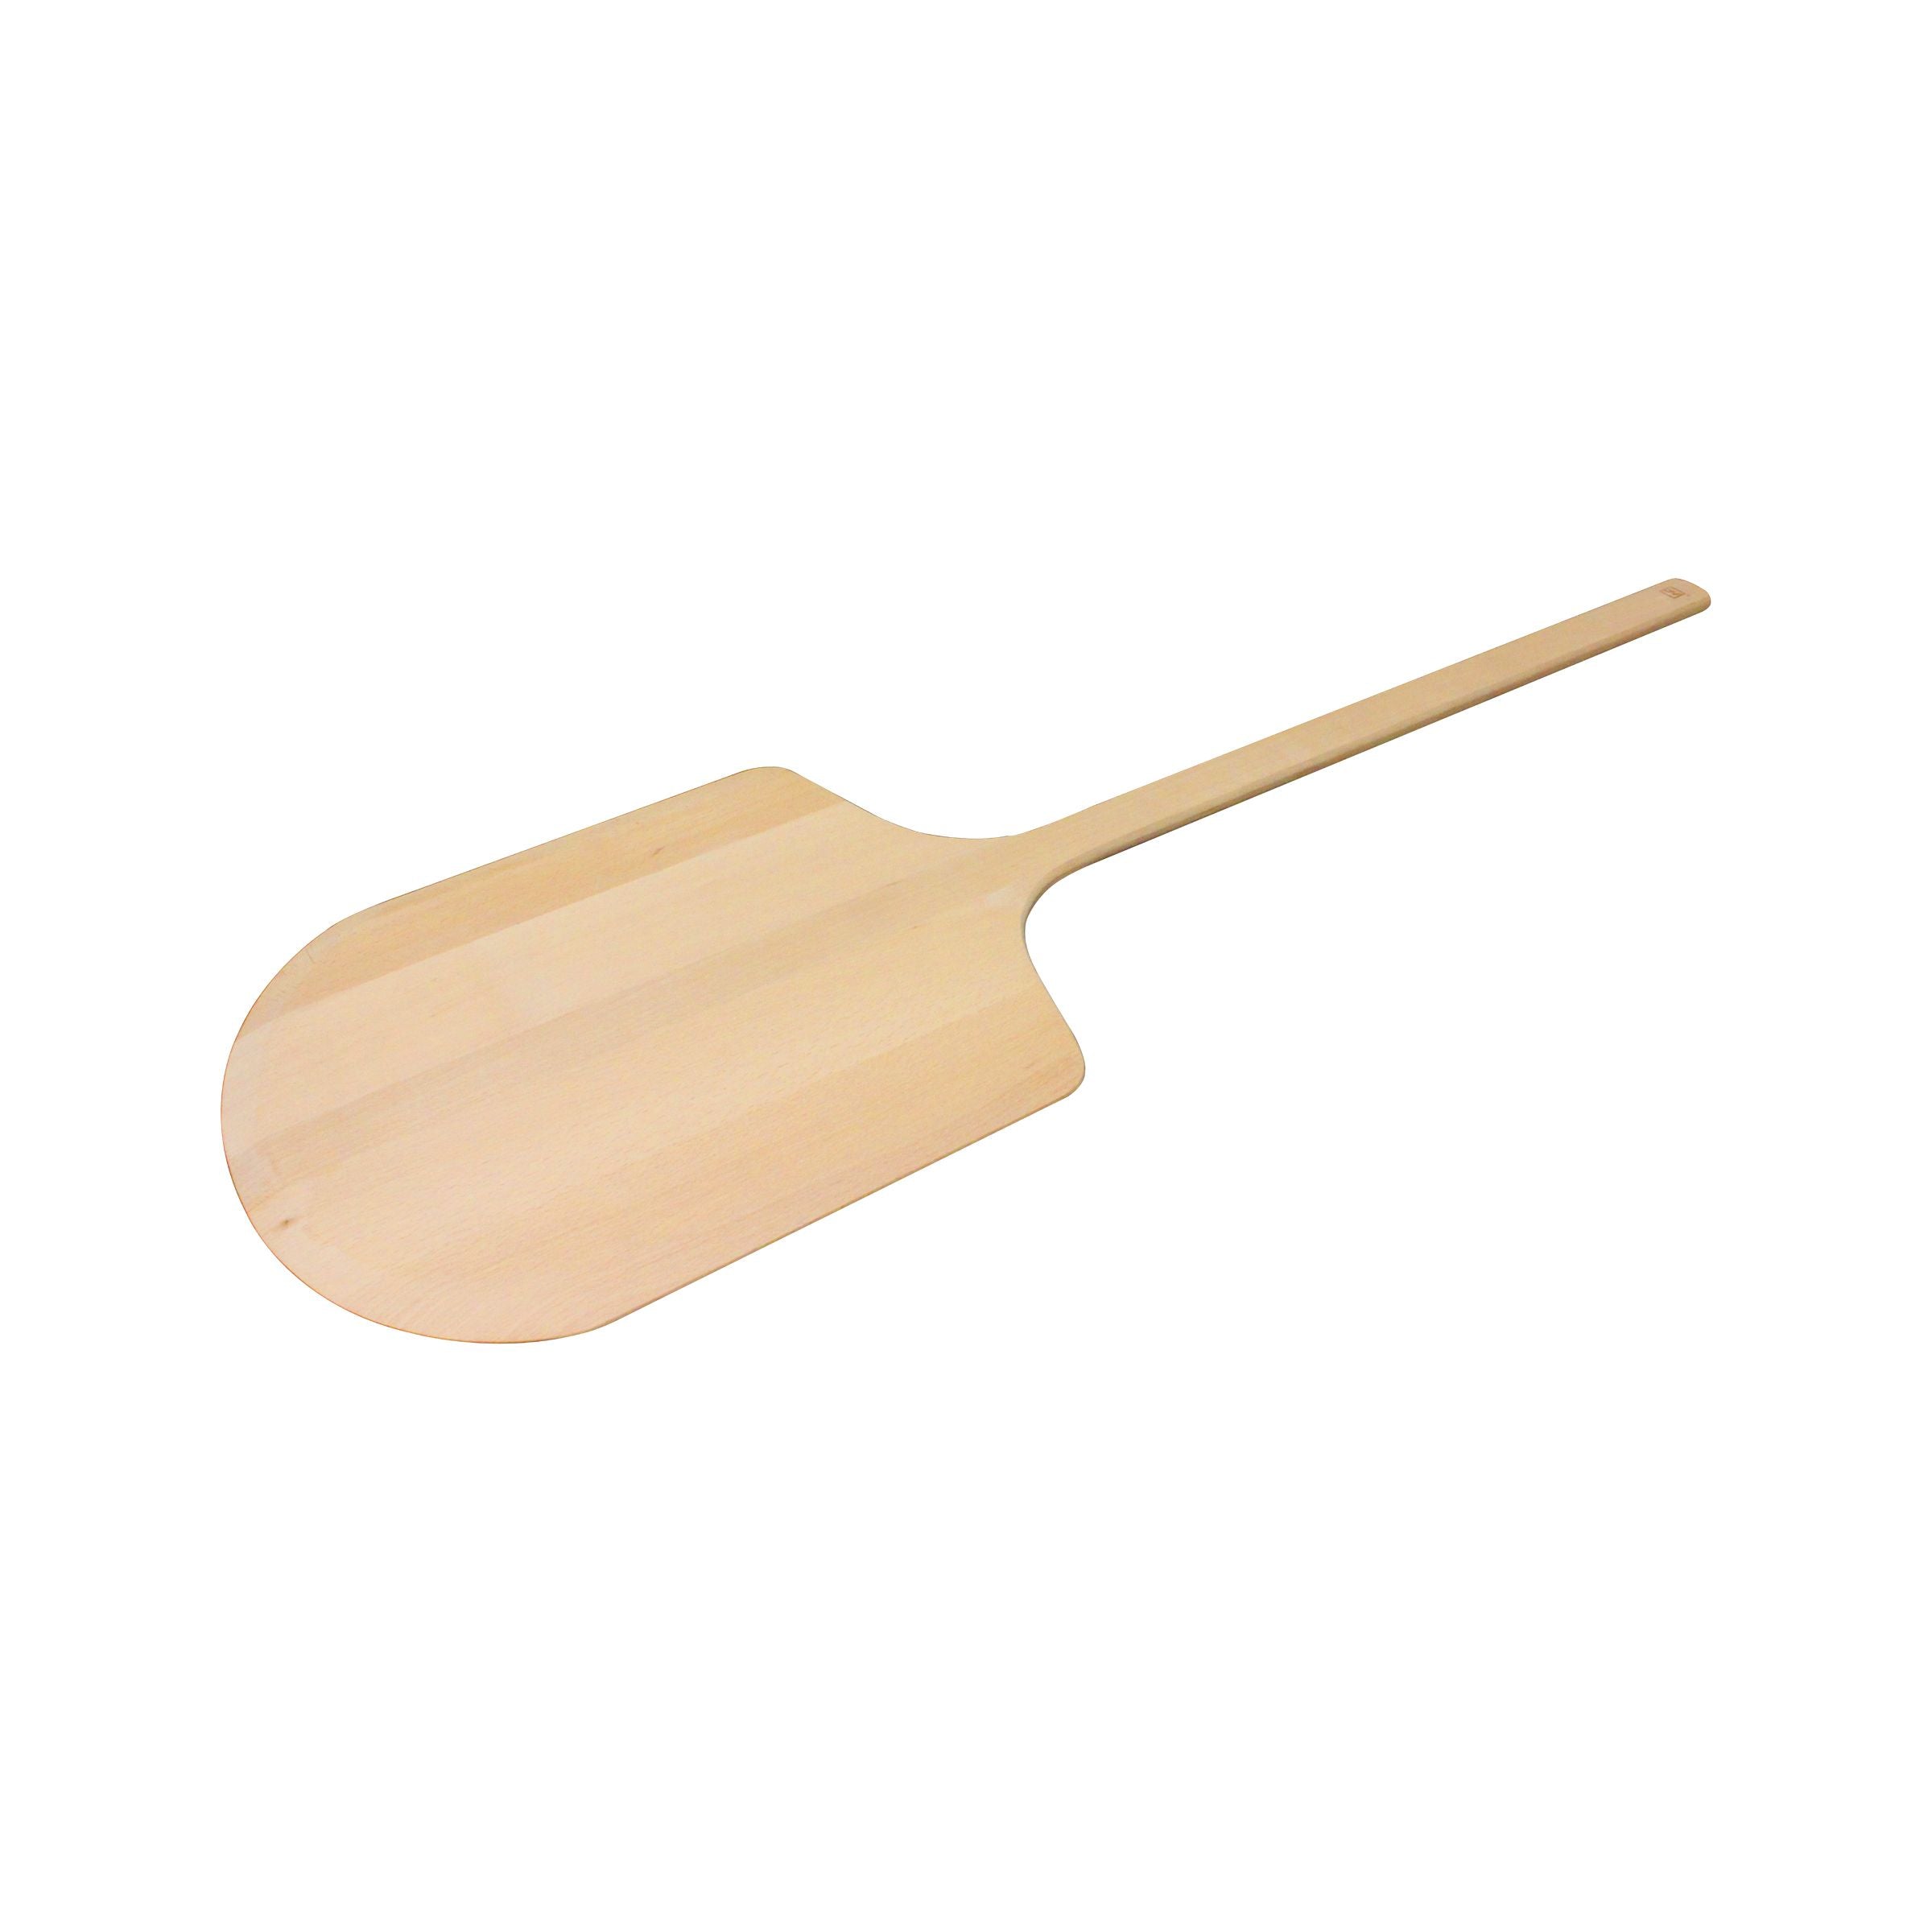 Thunder Group WDPP2042 Wooden Pizza Peel 20" x 21" Blade, 42" Overall Length